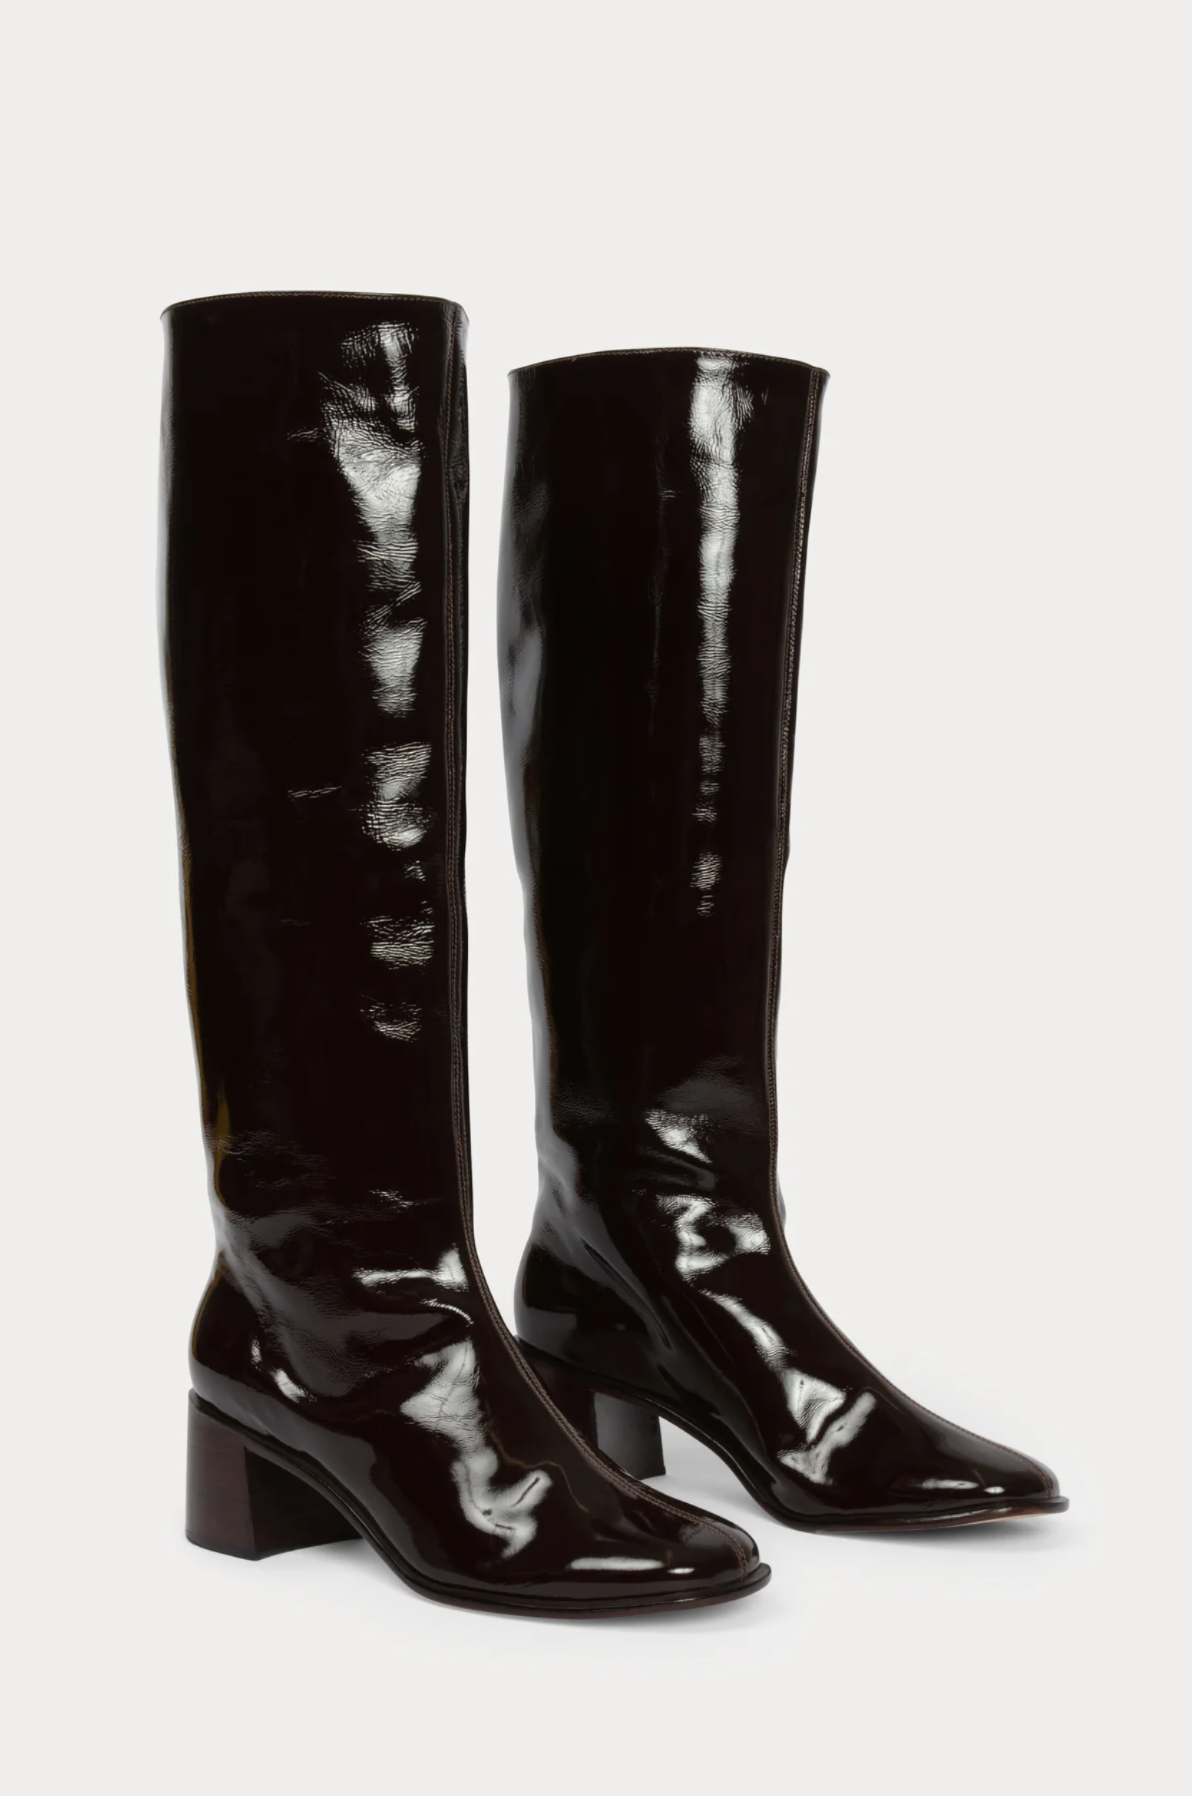 Sugarcane Boot in Brown Crinkle Patent Leather by Rachel Comey http://www.shoprecital.com